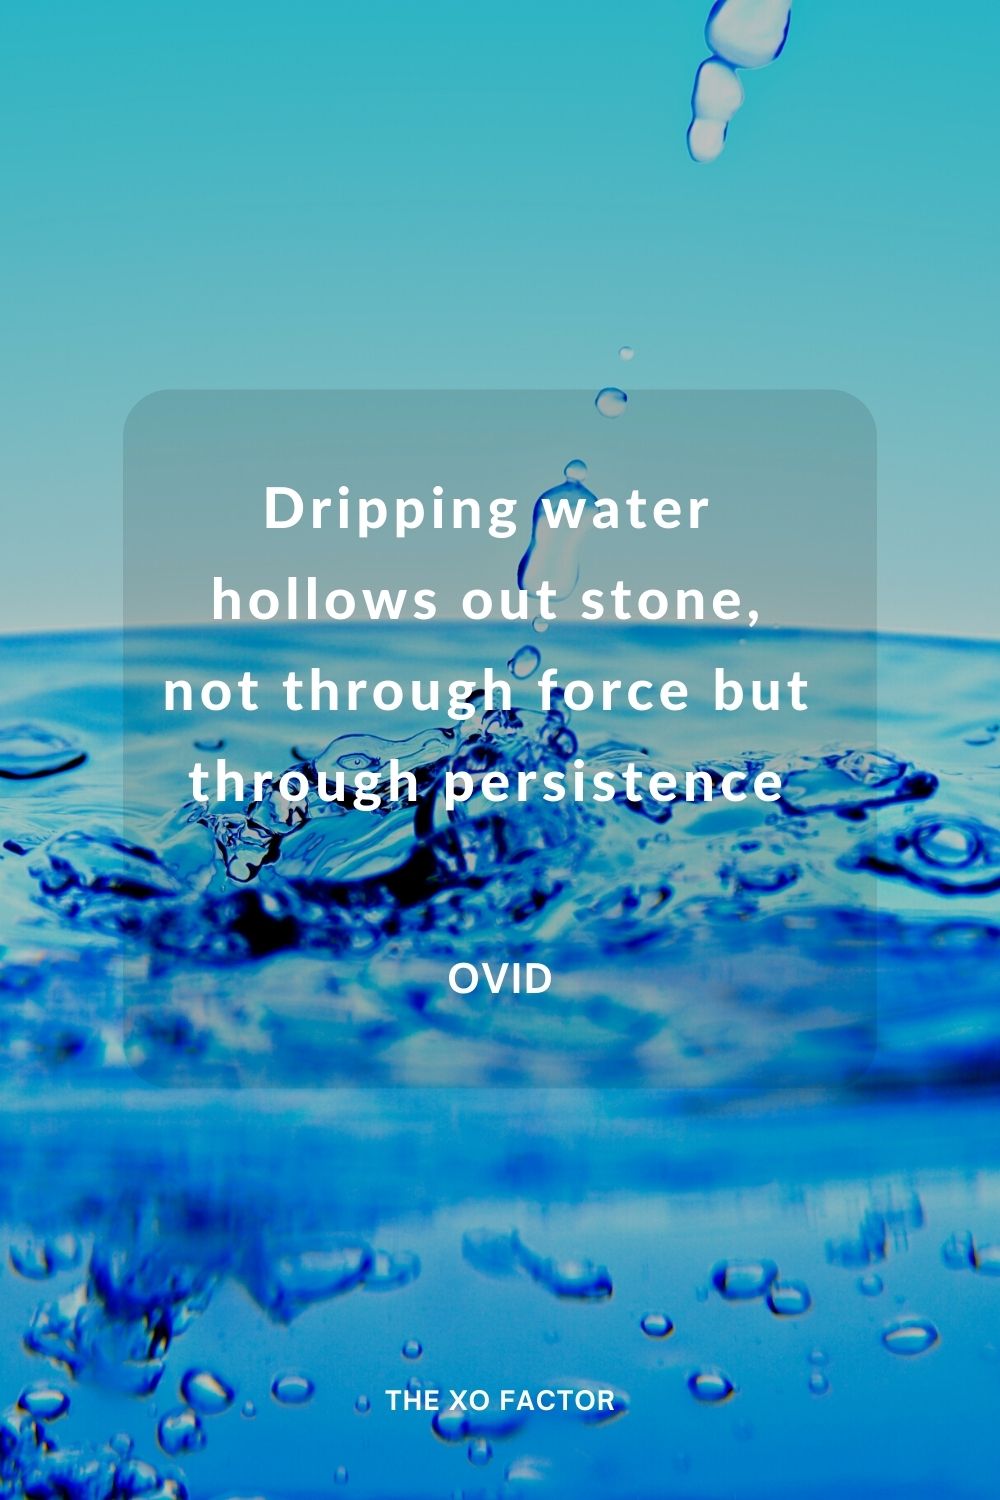 Dripping water hollows out stone, not through force but through persistence